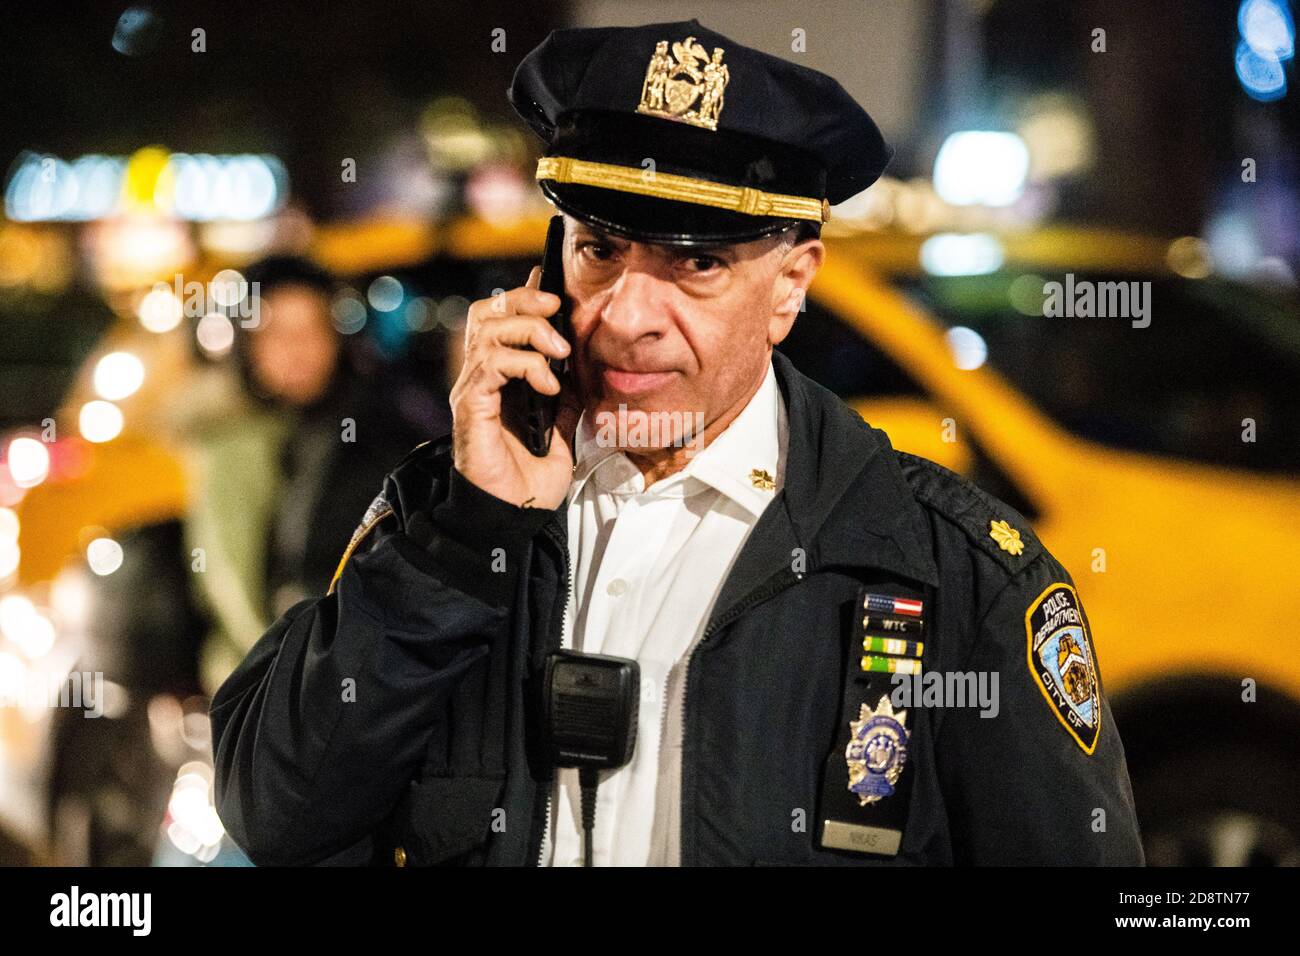 New York, United States. 31st Oct, 2020. New York Police Department officers secure the area before a planned protest near Union Square on October 31, 2020 in New York, New York. Photo: Chris Tuite/ImageSPACE/Sipa USA Credit: Sipa USA/Alamy Live News Stock Photo